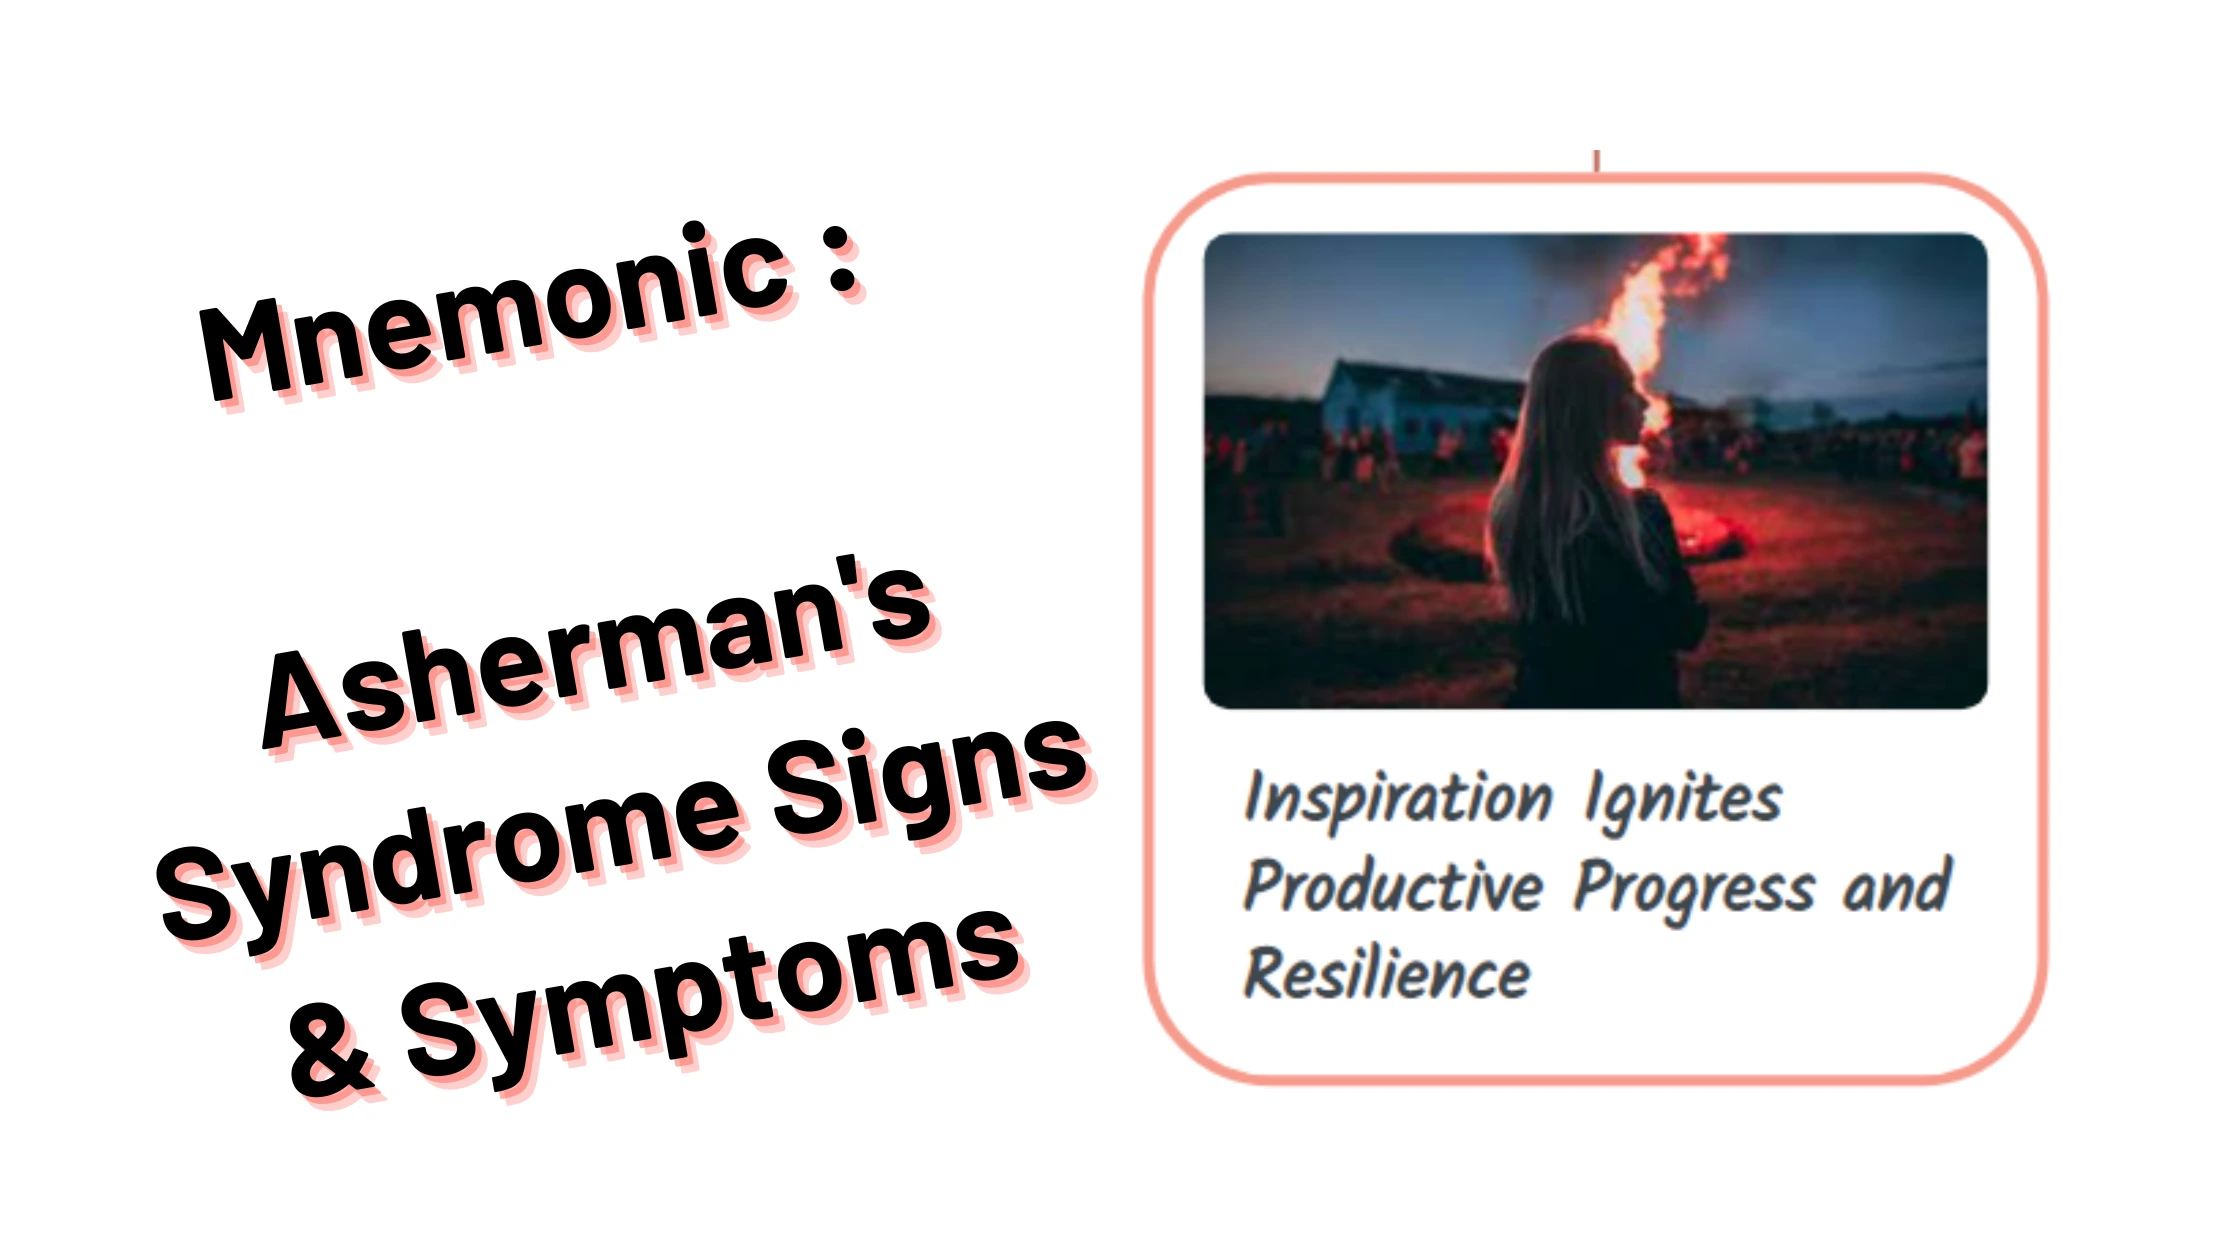 You are currently viewing [Very Cool] Mnemonic : Asherman’s Syndrome Signs & Symptoms